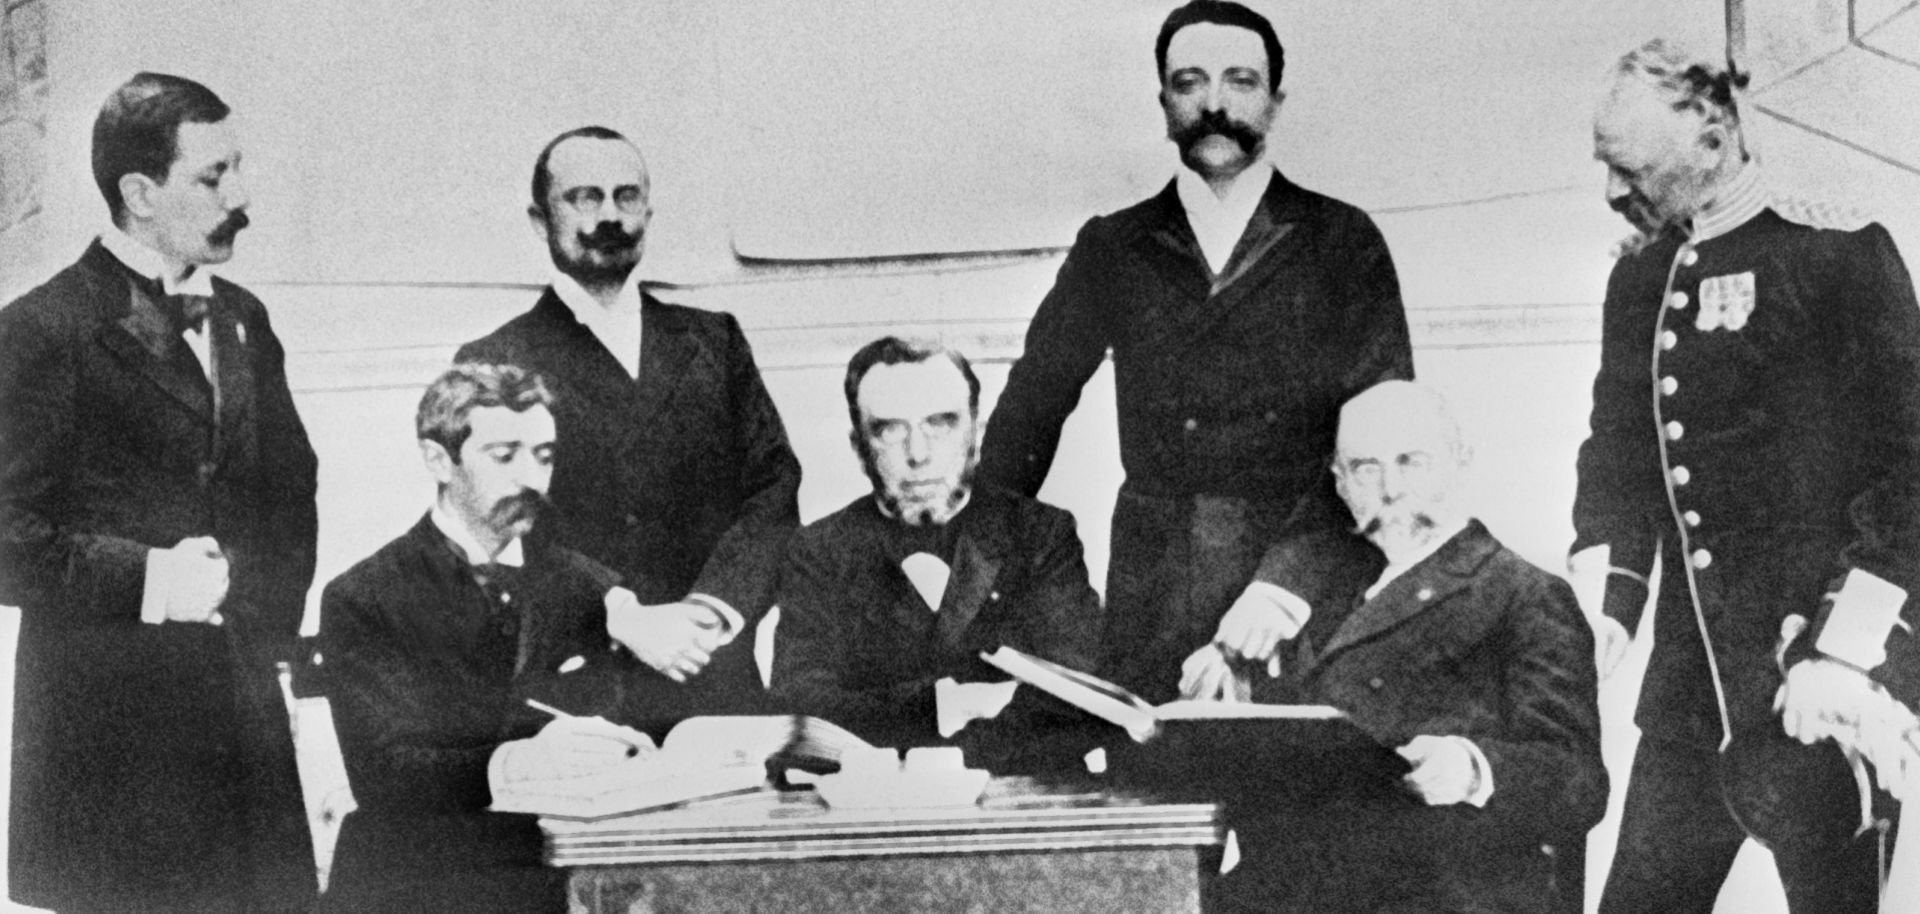 Pierre de Coubertin (sitting, left) poses with members of the first International Olympic Committee in Athens, Greece, in 1896.